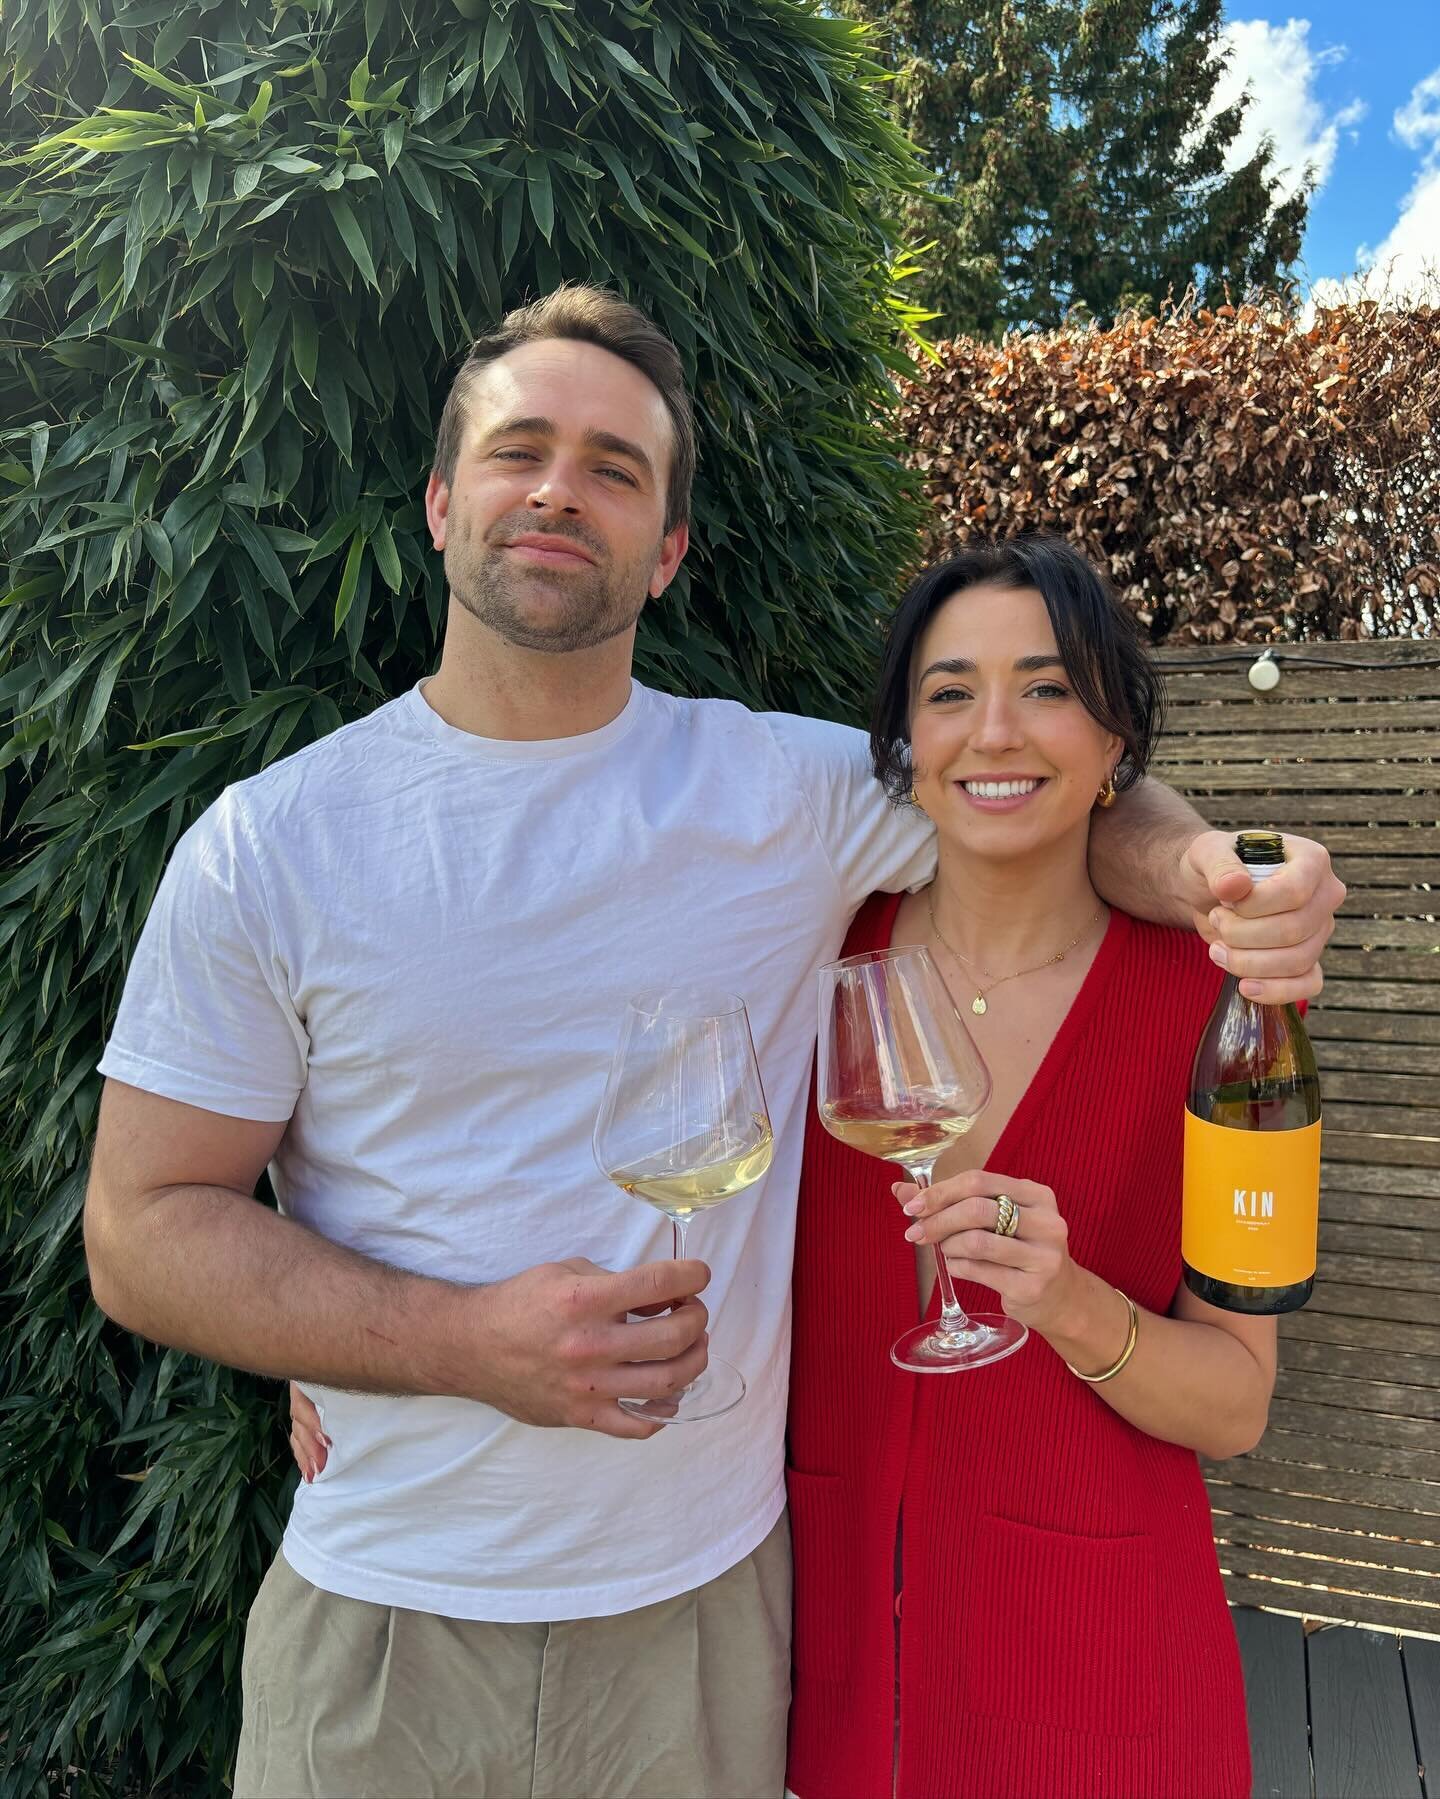 Today we&rsquo;re celebrating the end of a beautiful Easter weekend at Kinsbrook Farmhouse, surrounded by our friends and family (and a bottle or two of KIN). 
 
What an incredible Easter. There were definitely a couple of surreal moments this weeken